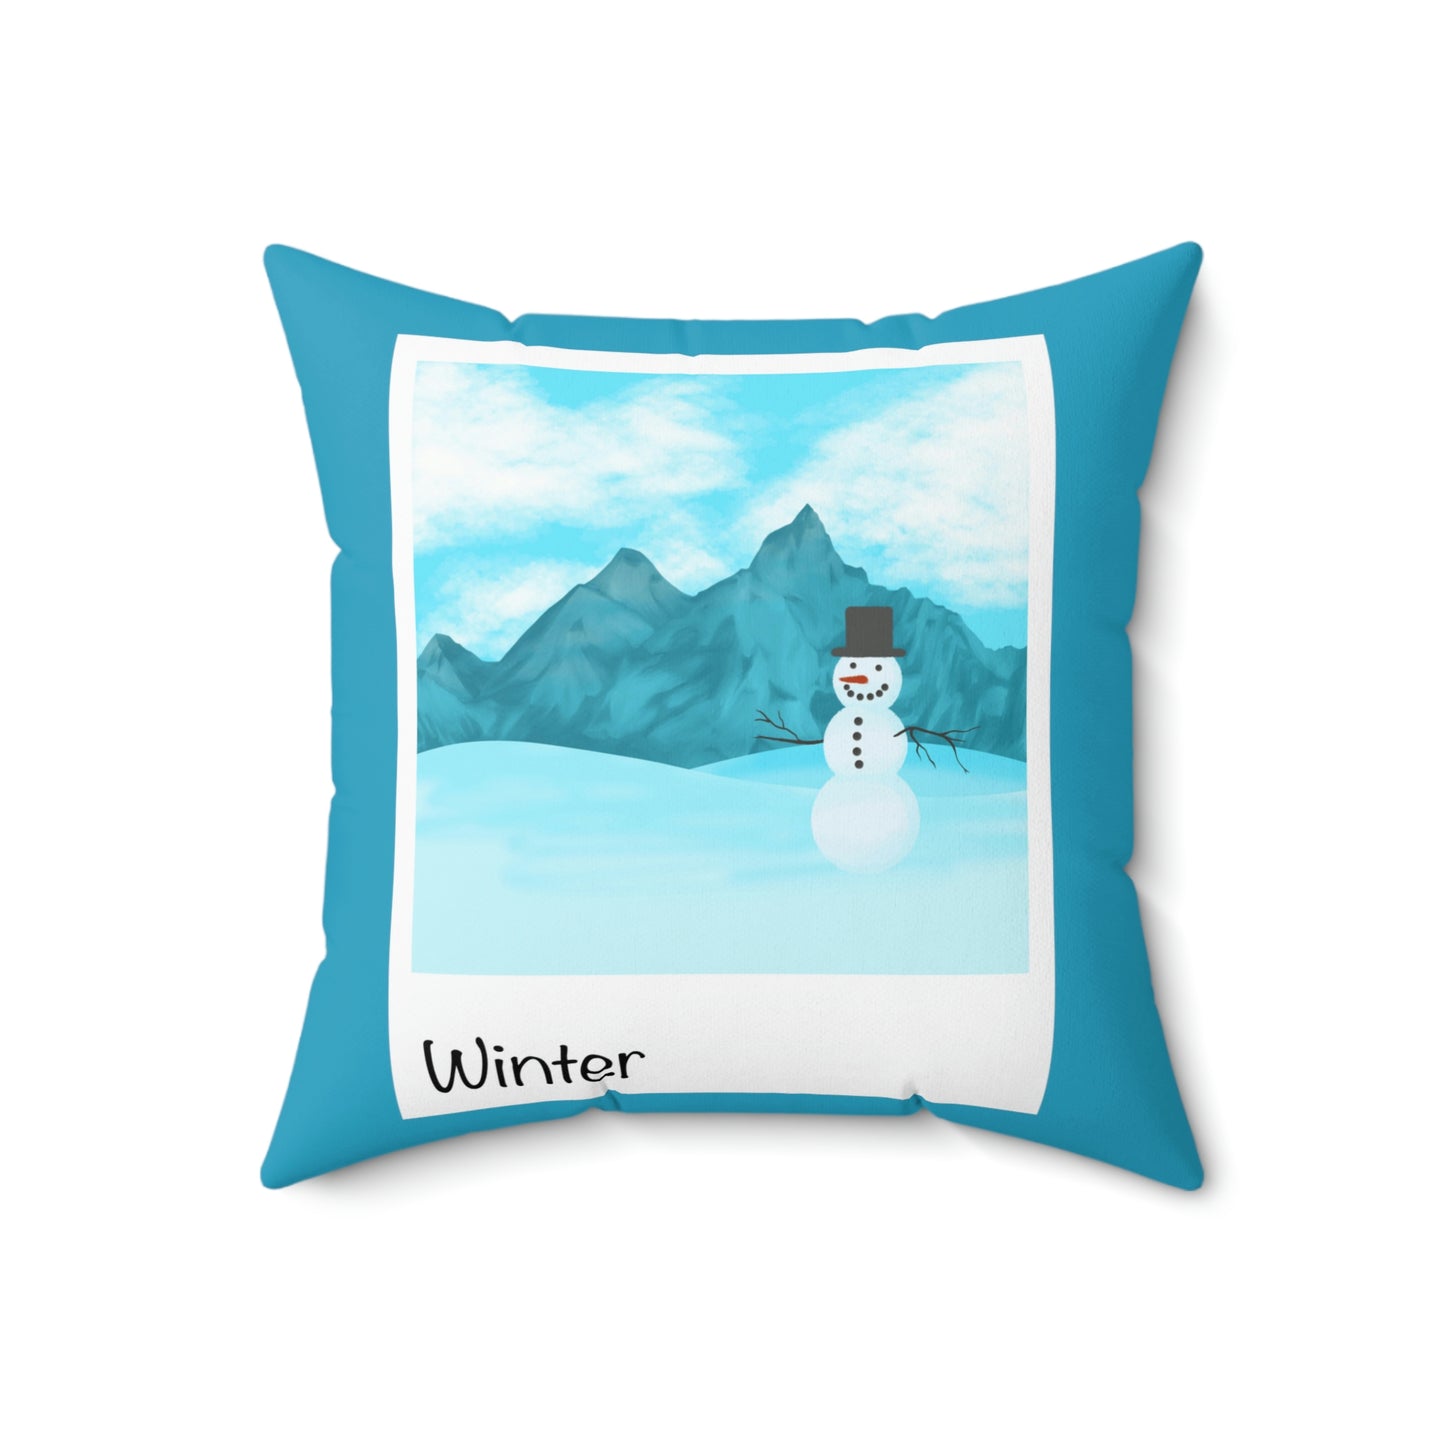 Spun Polyester Square Pillow Case ”Winter Photo on Turquoise”